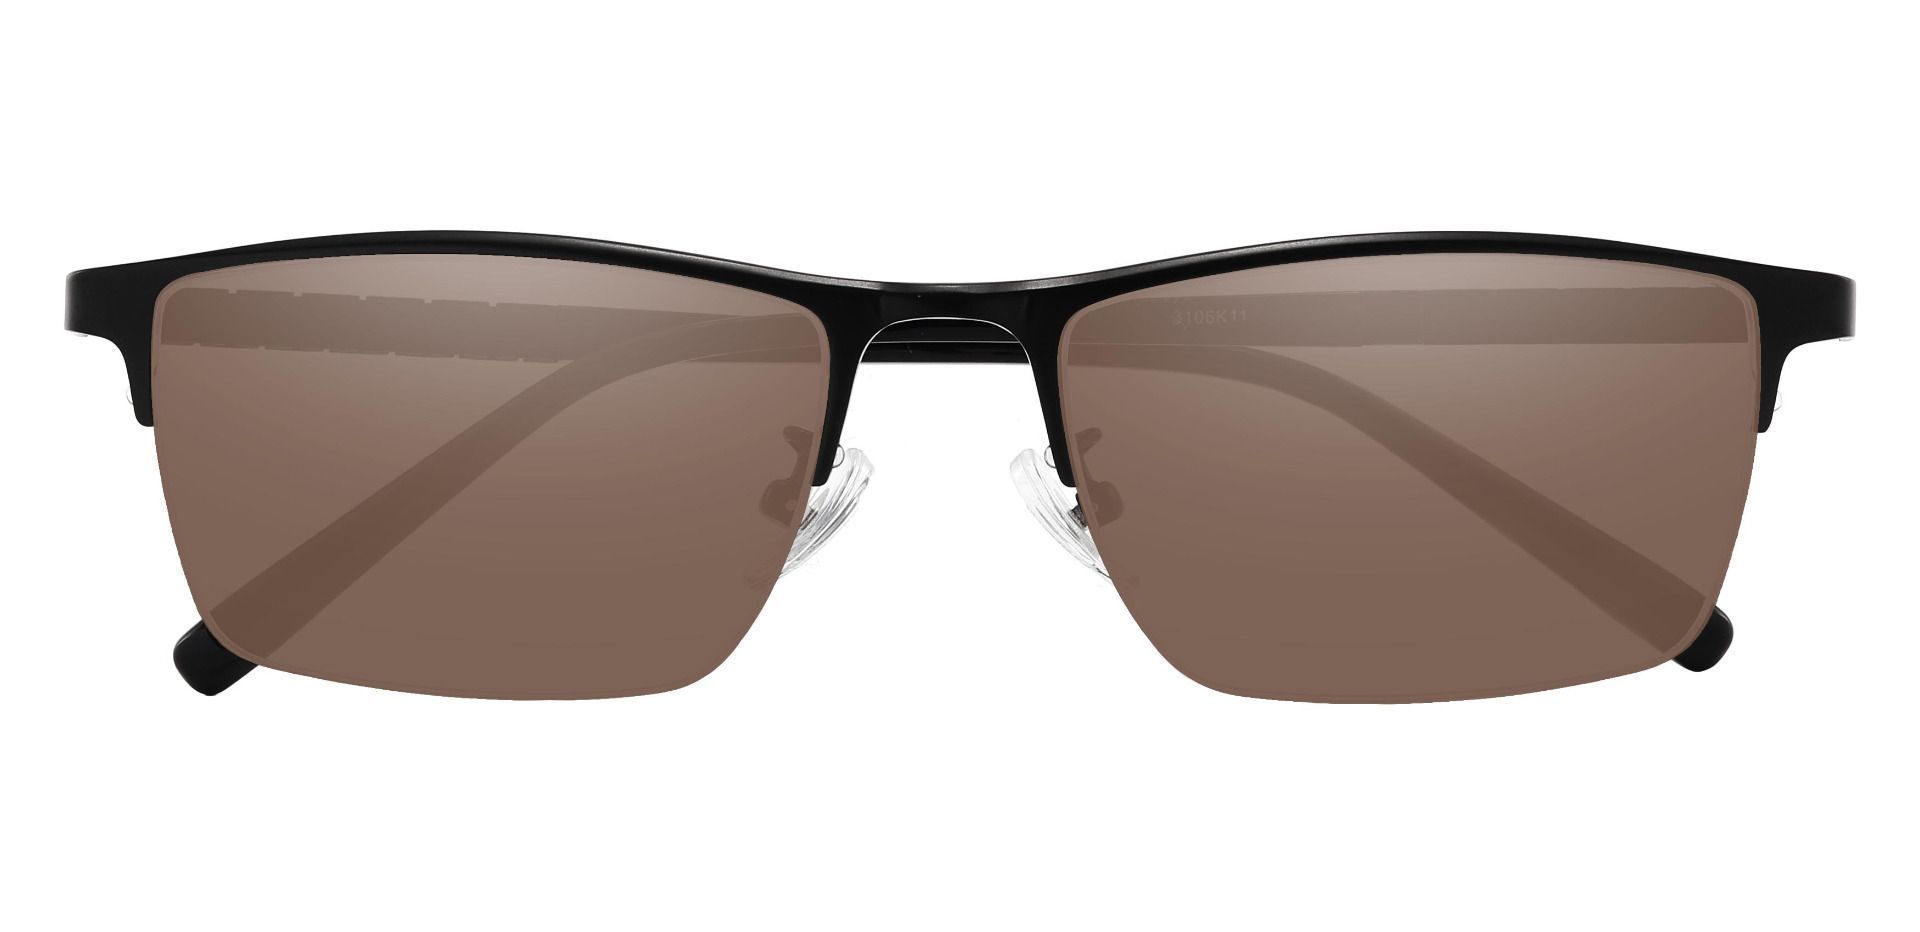 Maine Rectangle Non-Rx Sunglasses - Black Frame With Brown Lenses